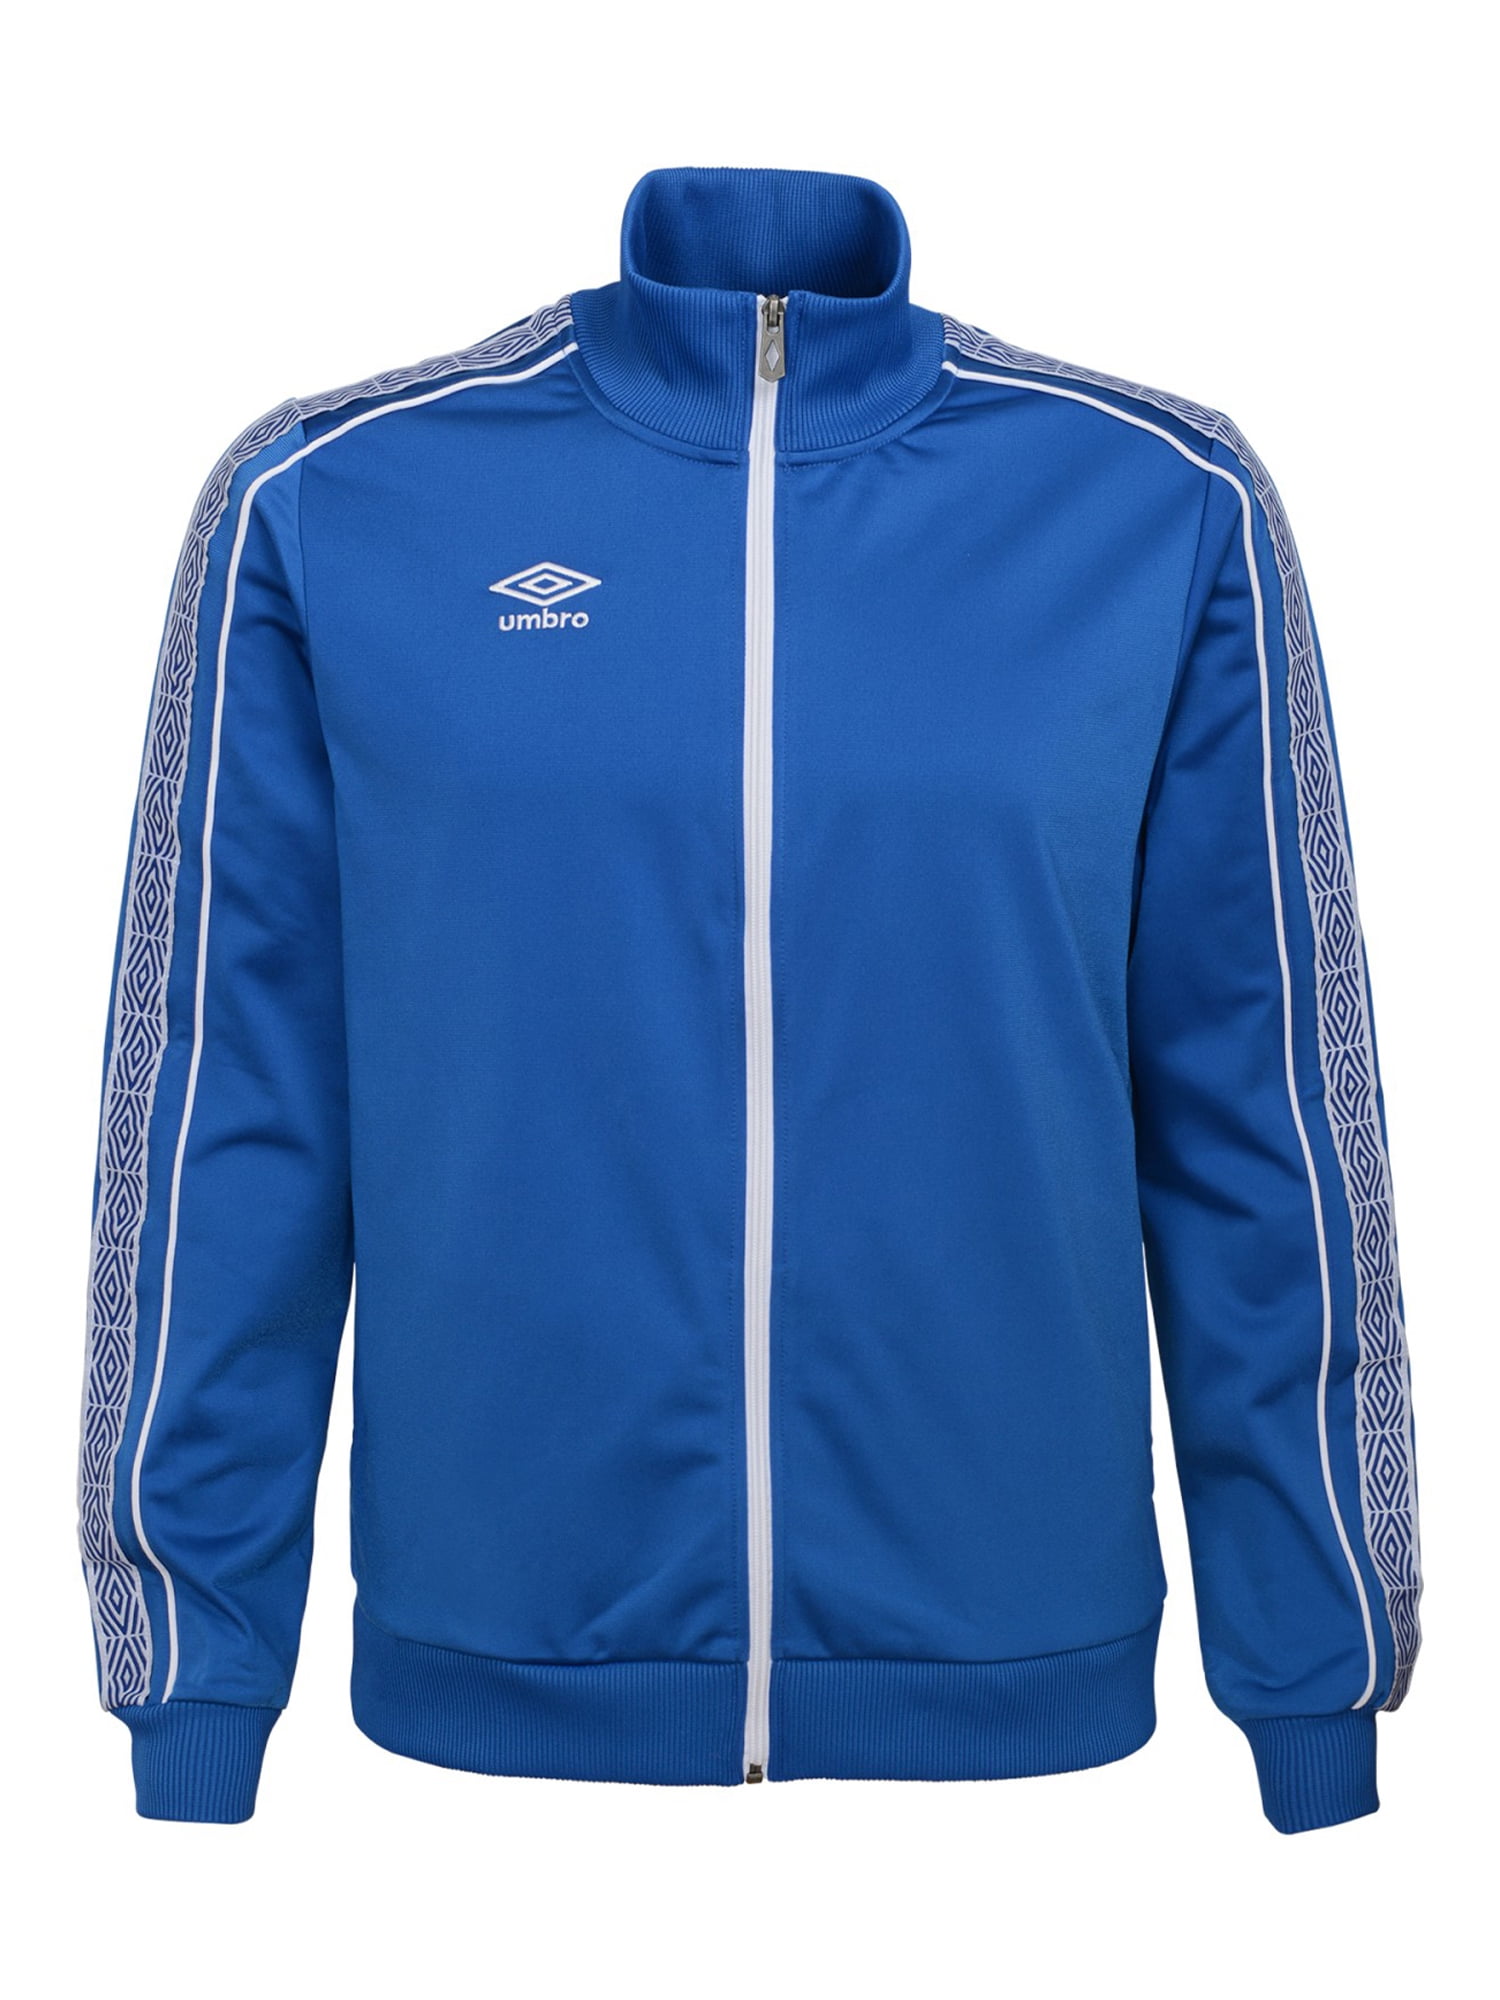 Boys Umbro Woven Sportwear Casual Training Jacket Sizes Age from 7 to 14 Yrs 